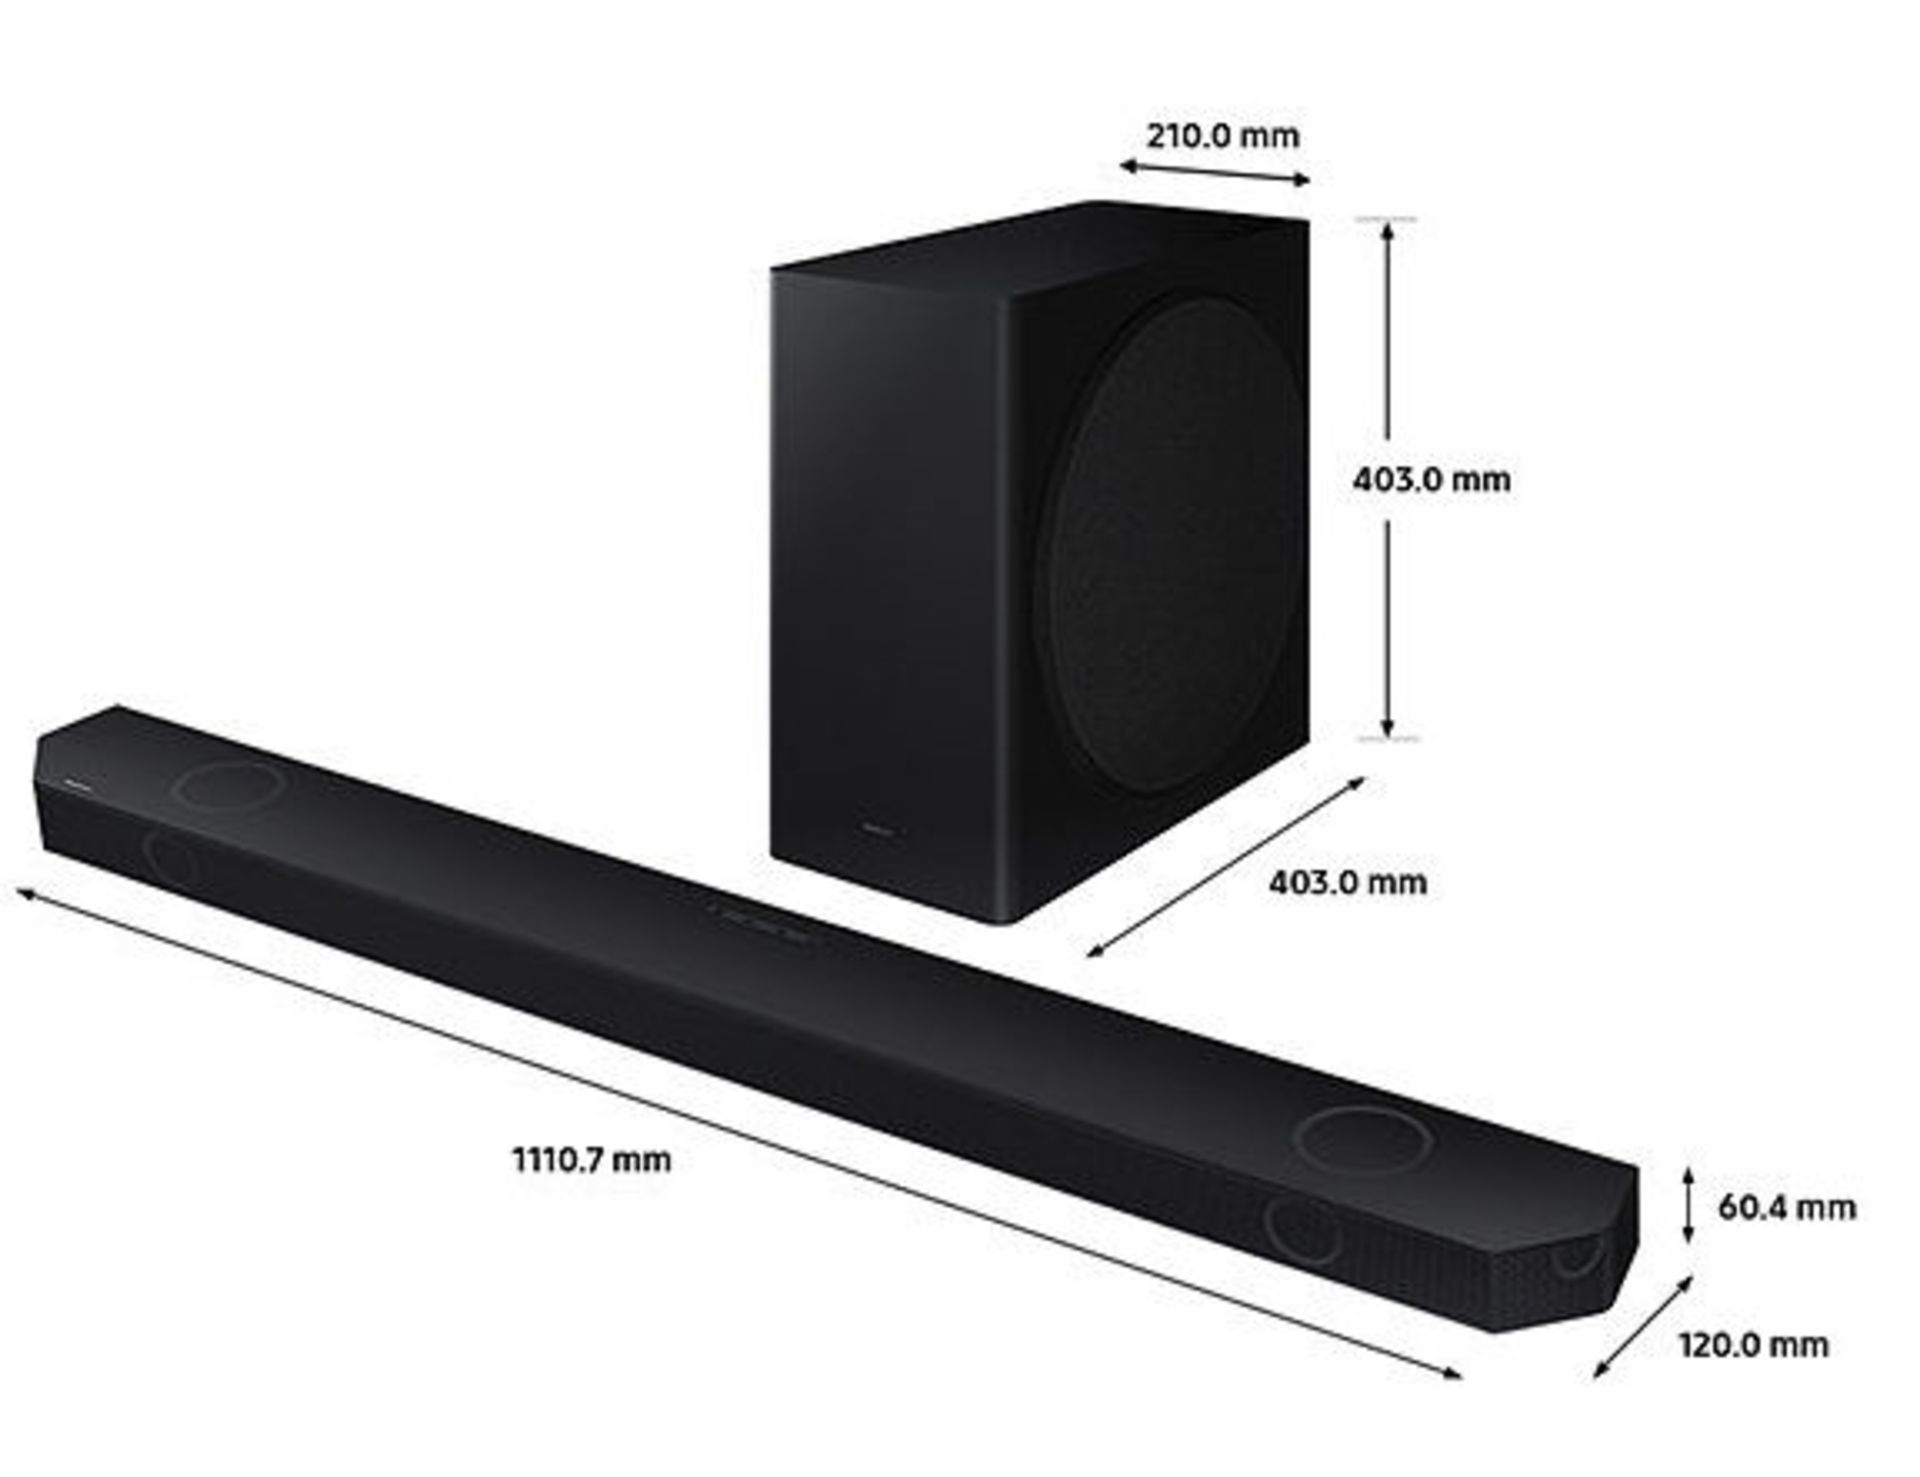 SAMSUNG HW-Q600C/XU 3.1.2 WIRELESS SOUND BAR WITH DOLBY ATMOS - WITH WARRANTY PACK - RRP £599 - Image 2 of 8